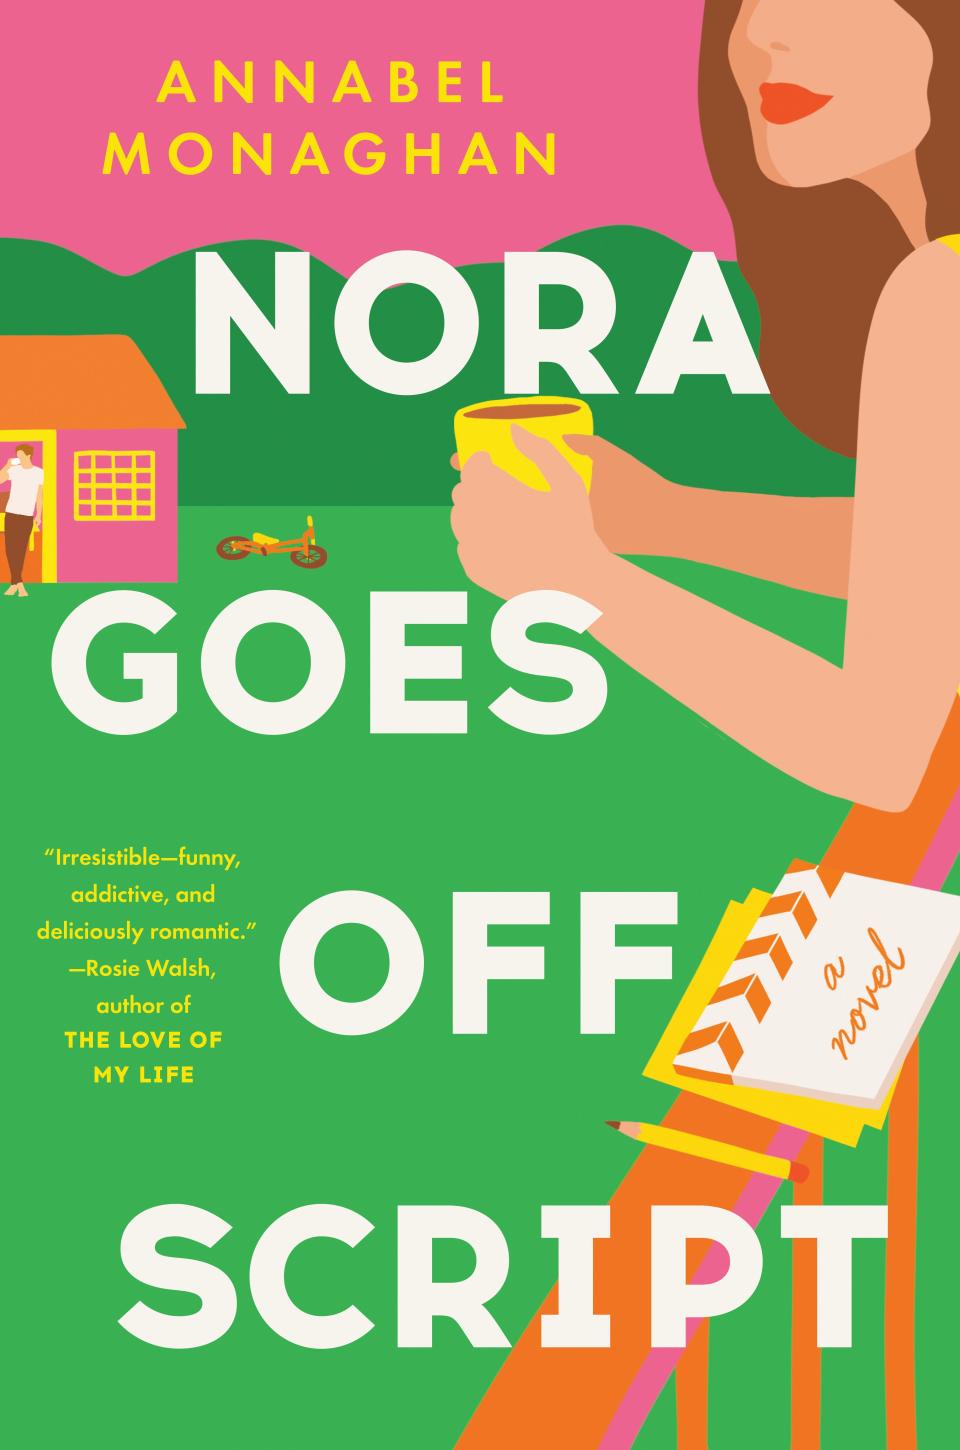 "Nora Goes Off Script," by Annabel Monaghan